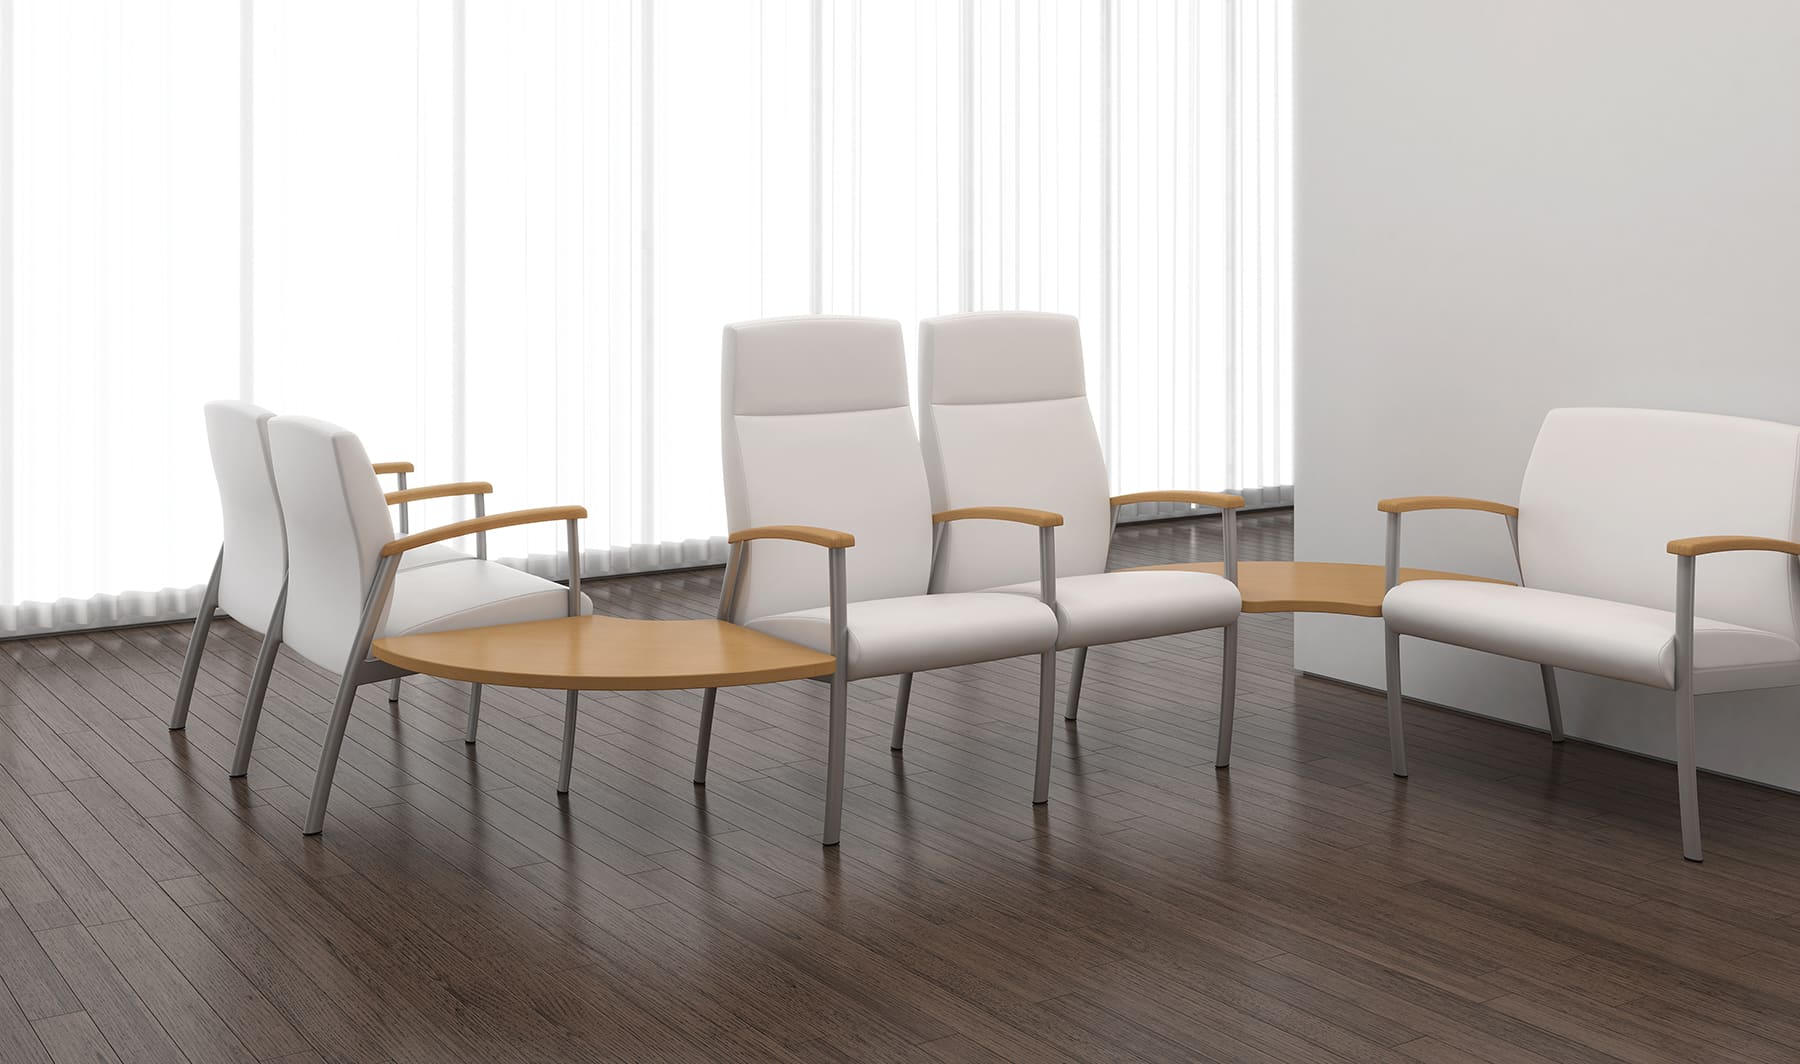 Solis Multiple Seating chairs